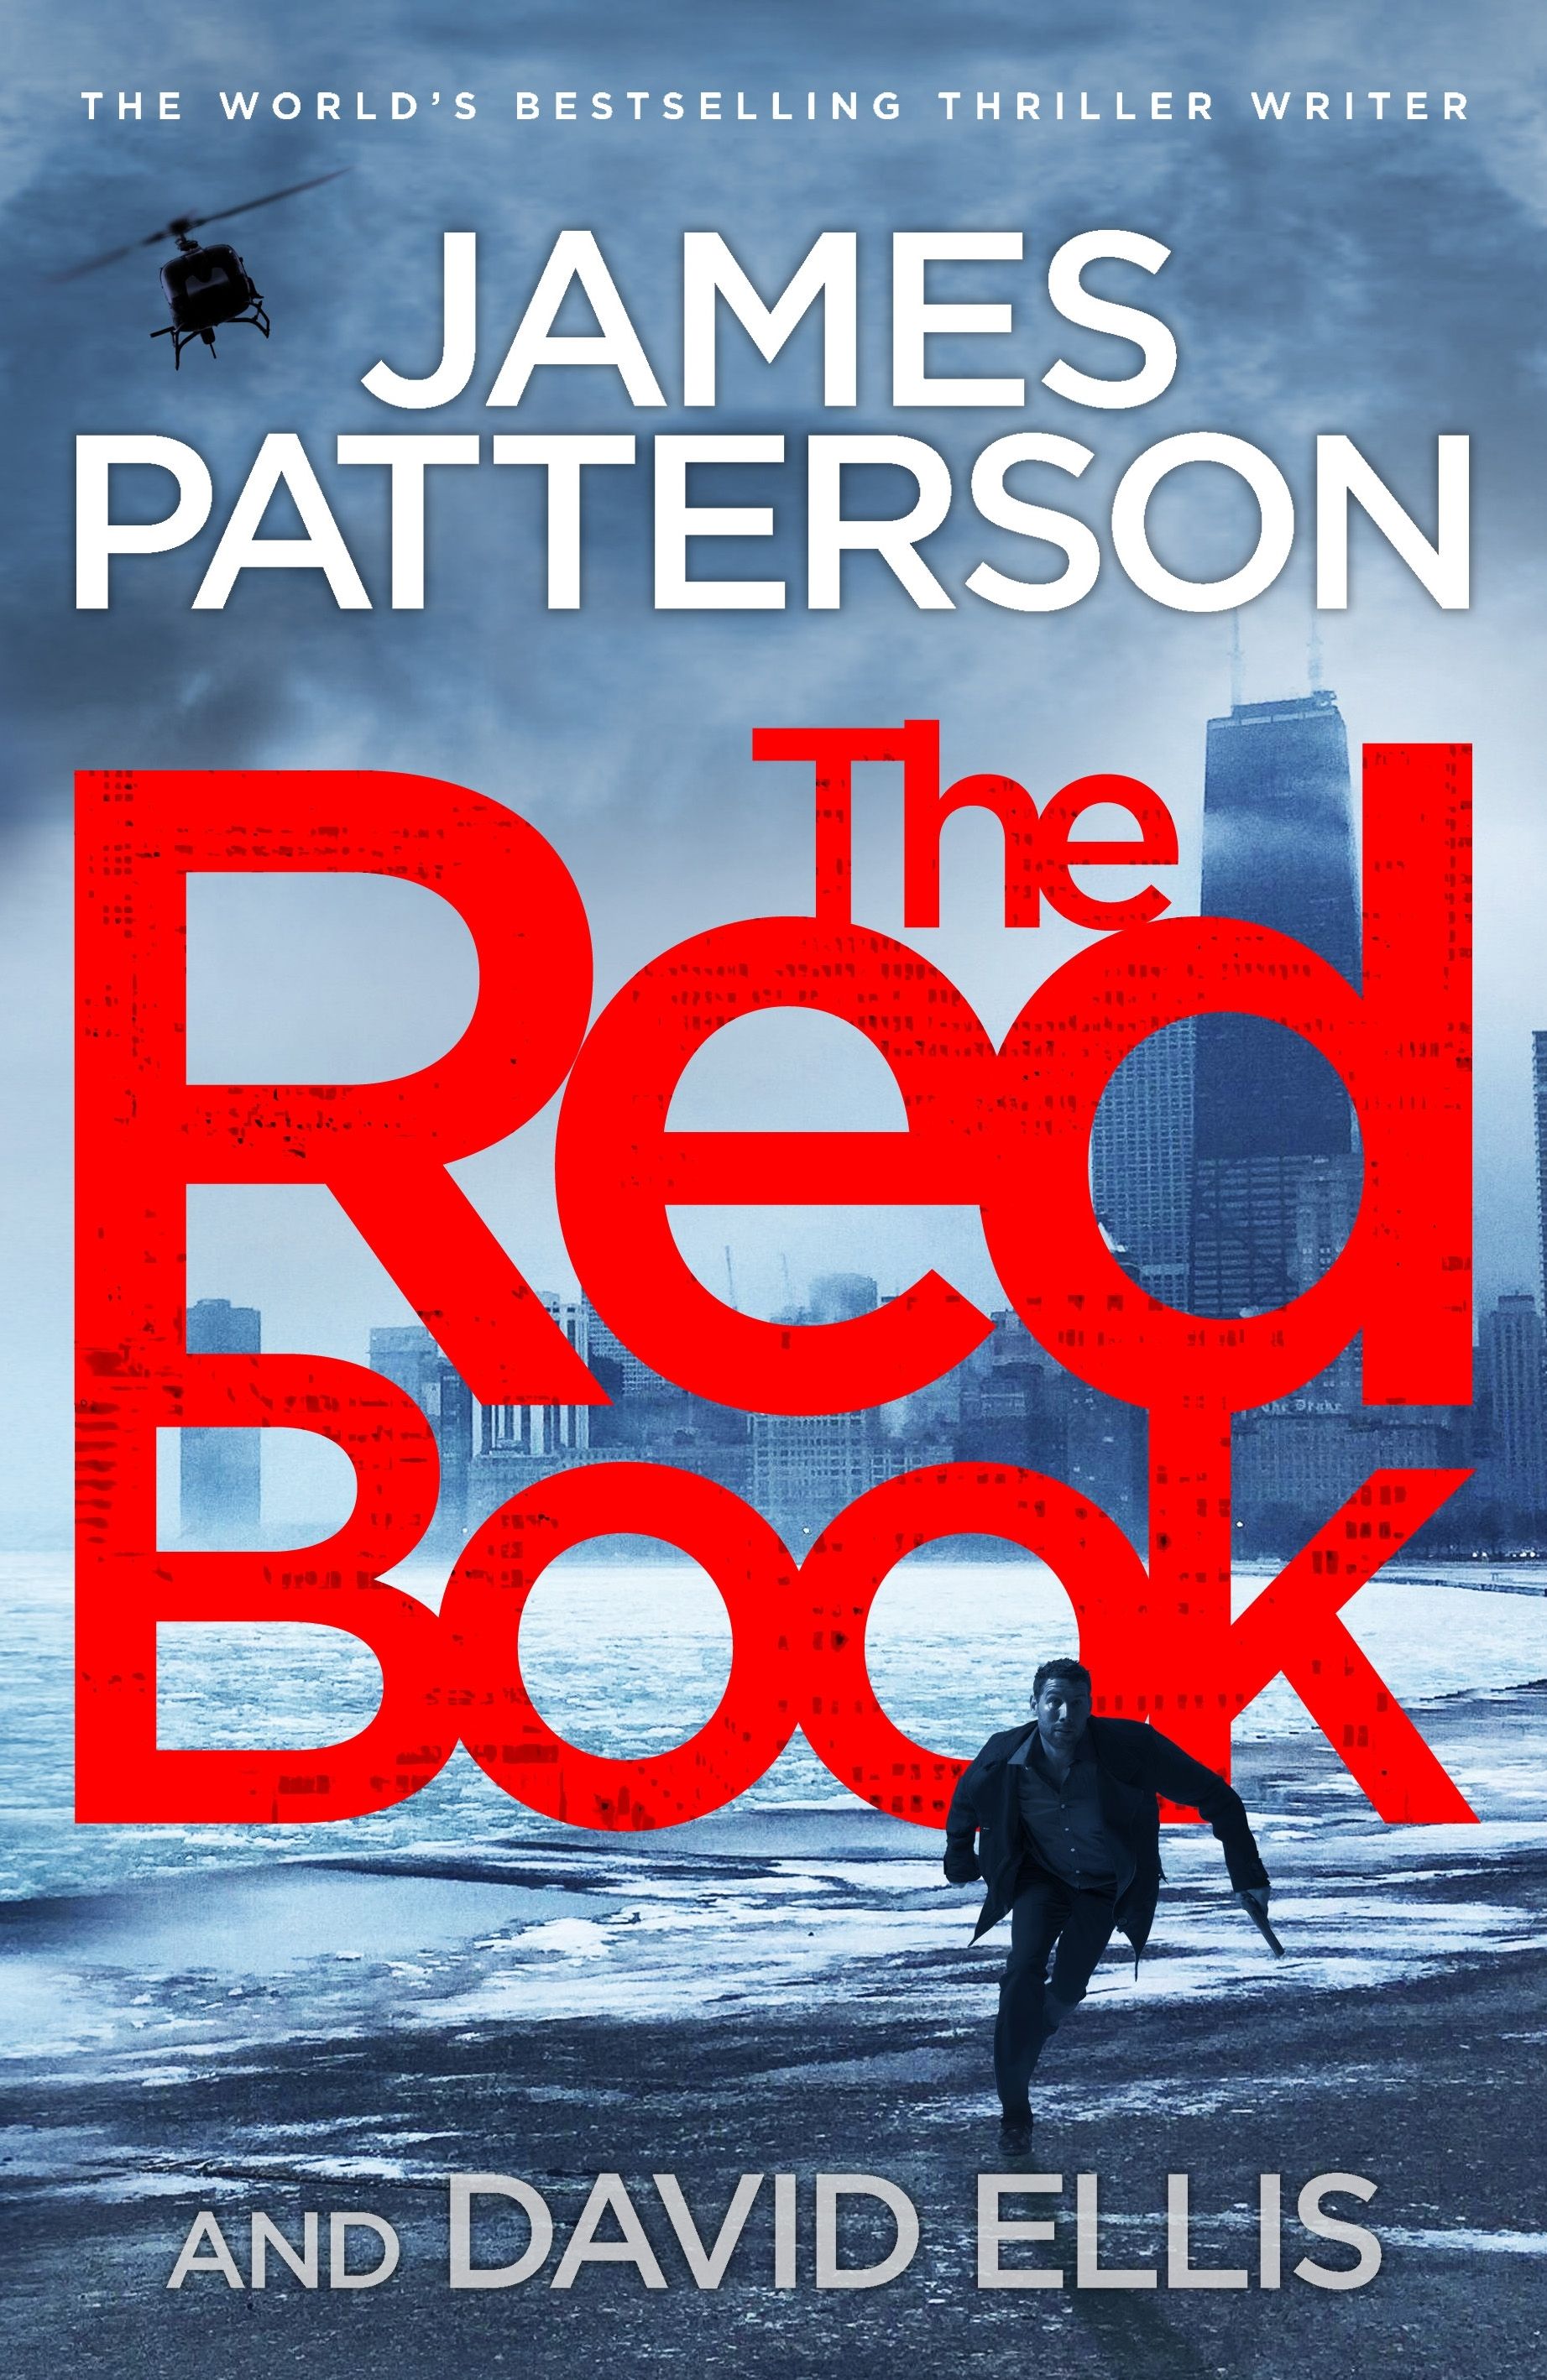 The Red Book : A Black Book Thriller